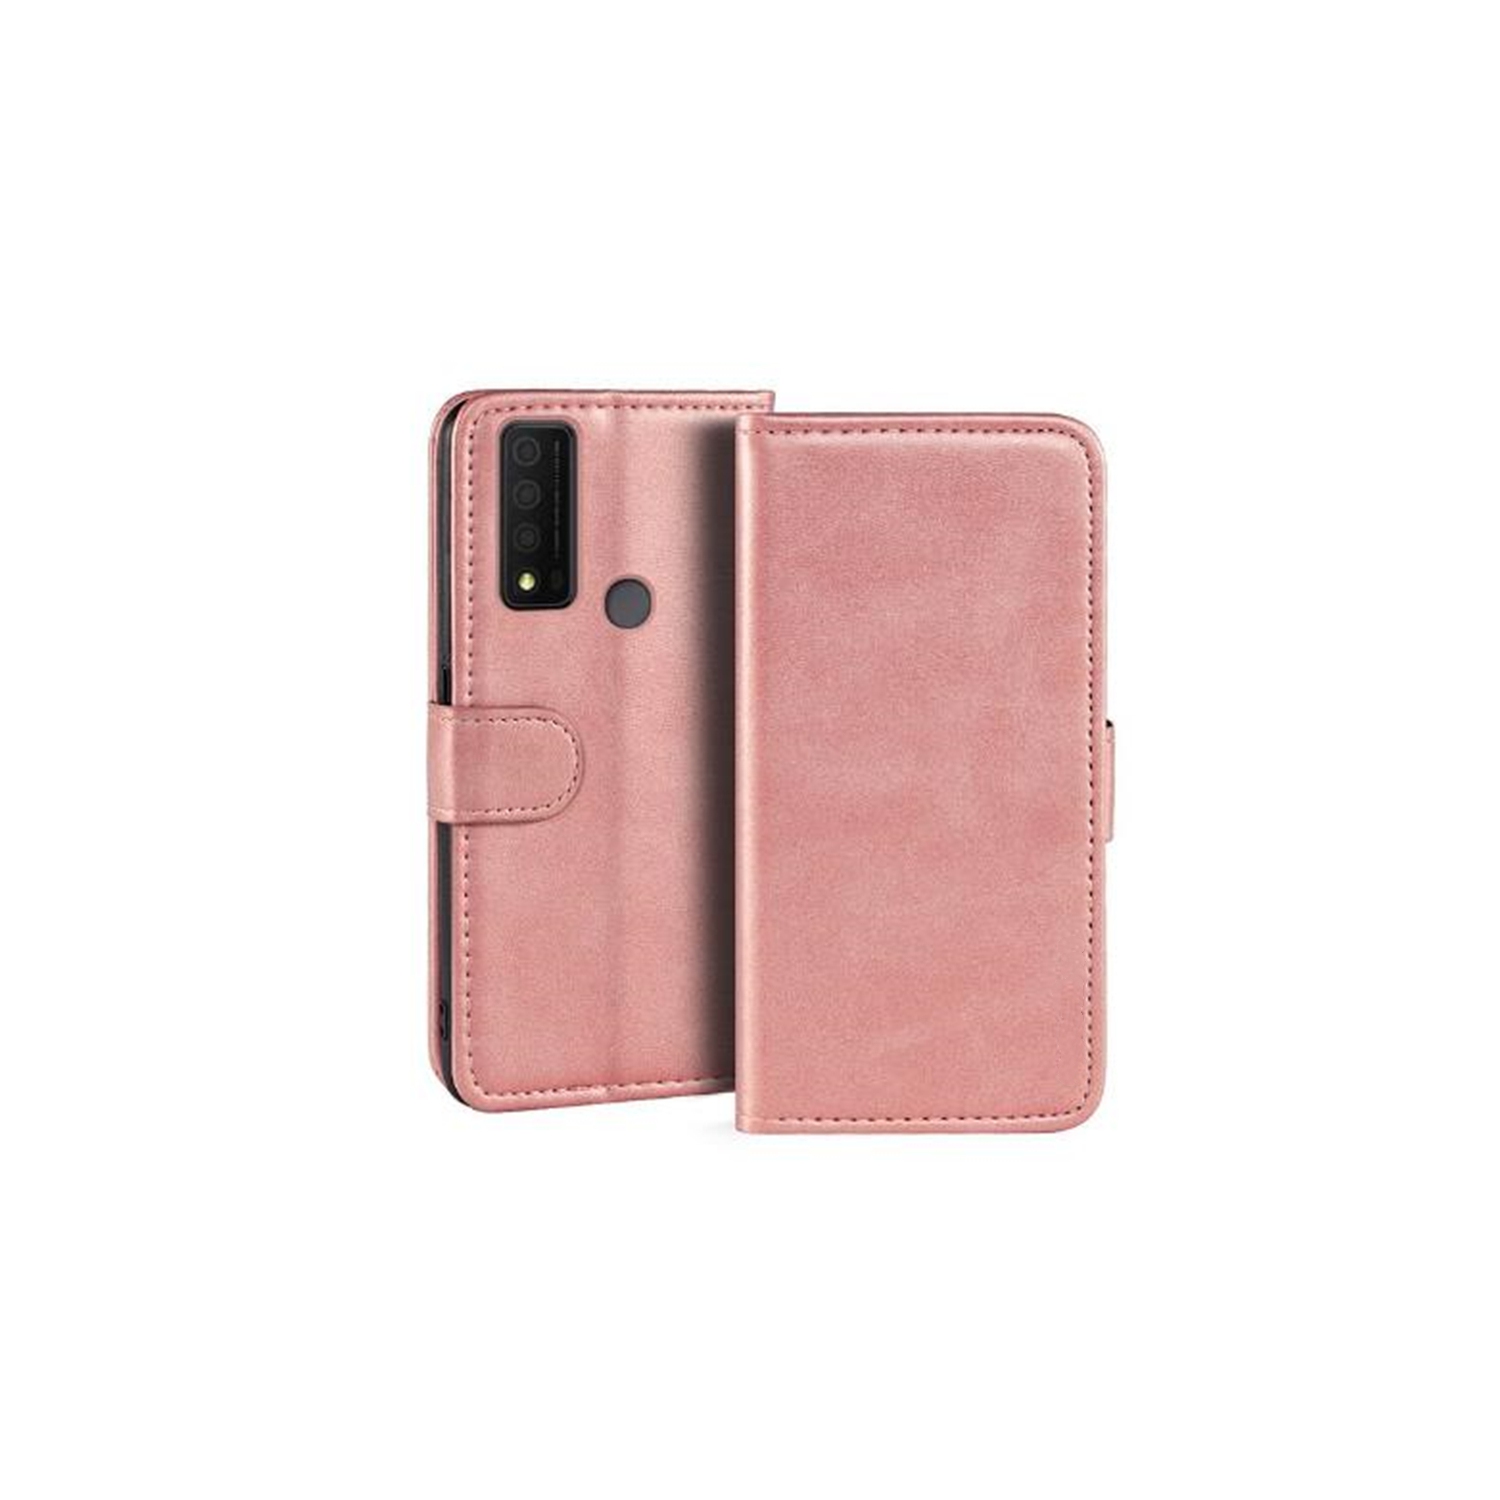 【CSmart】 Magnetic Card Slot Leather Folio Wallet Flip Case Cover for TCL 30 XE 5G, Rose Gold